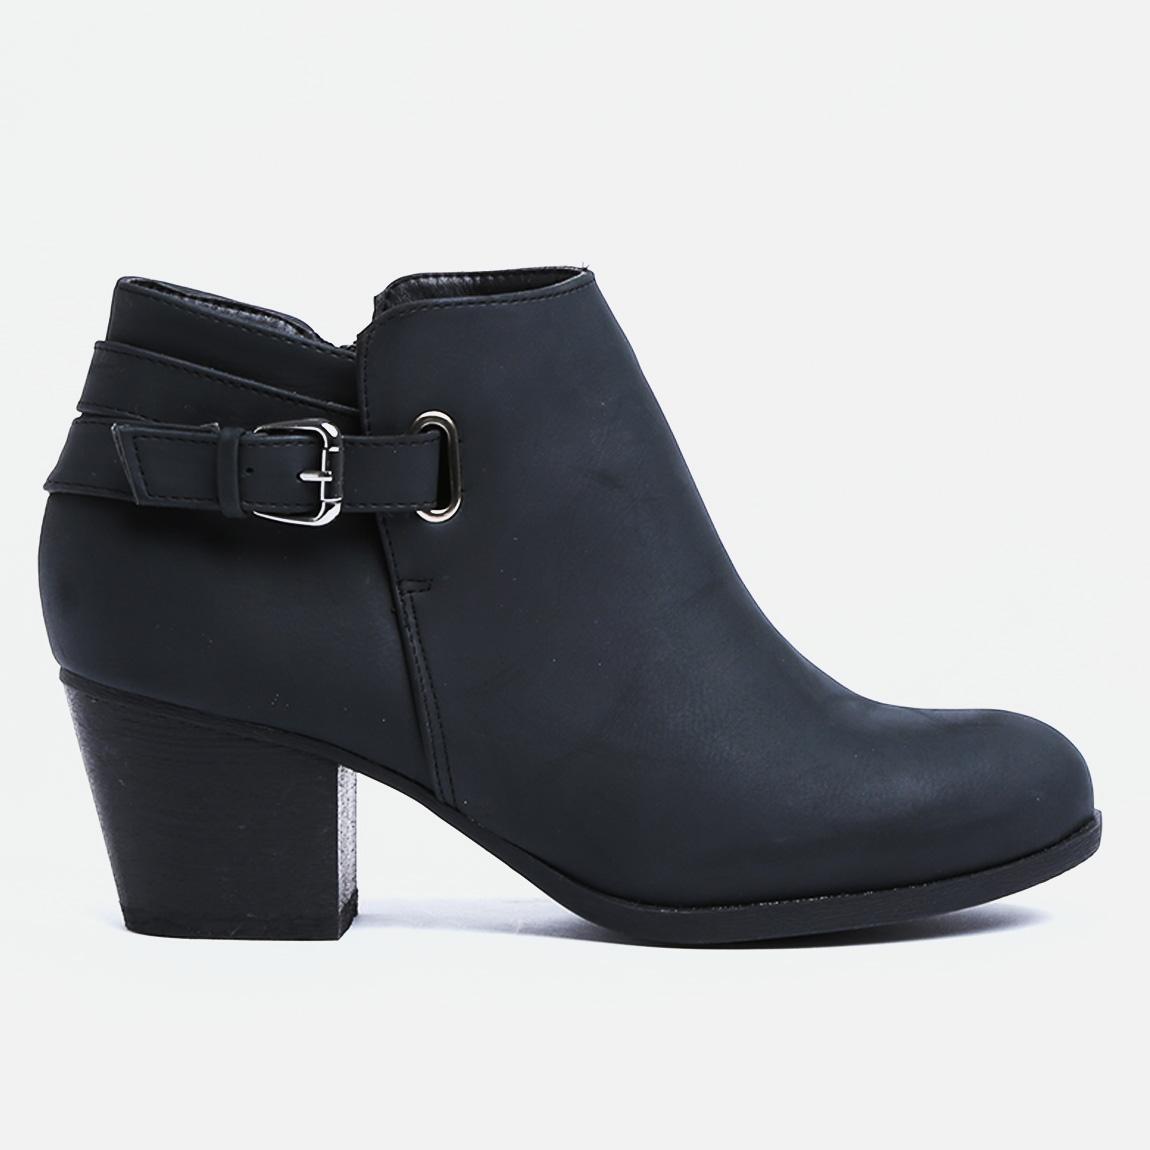 Wide Fit Daddy Ankle Boot - Black New Look Boots | Superbalist.com